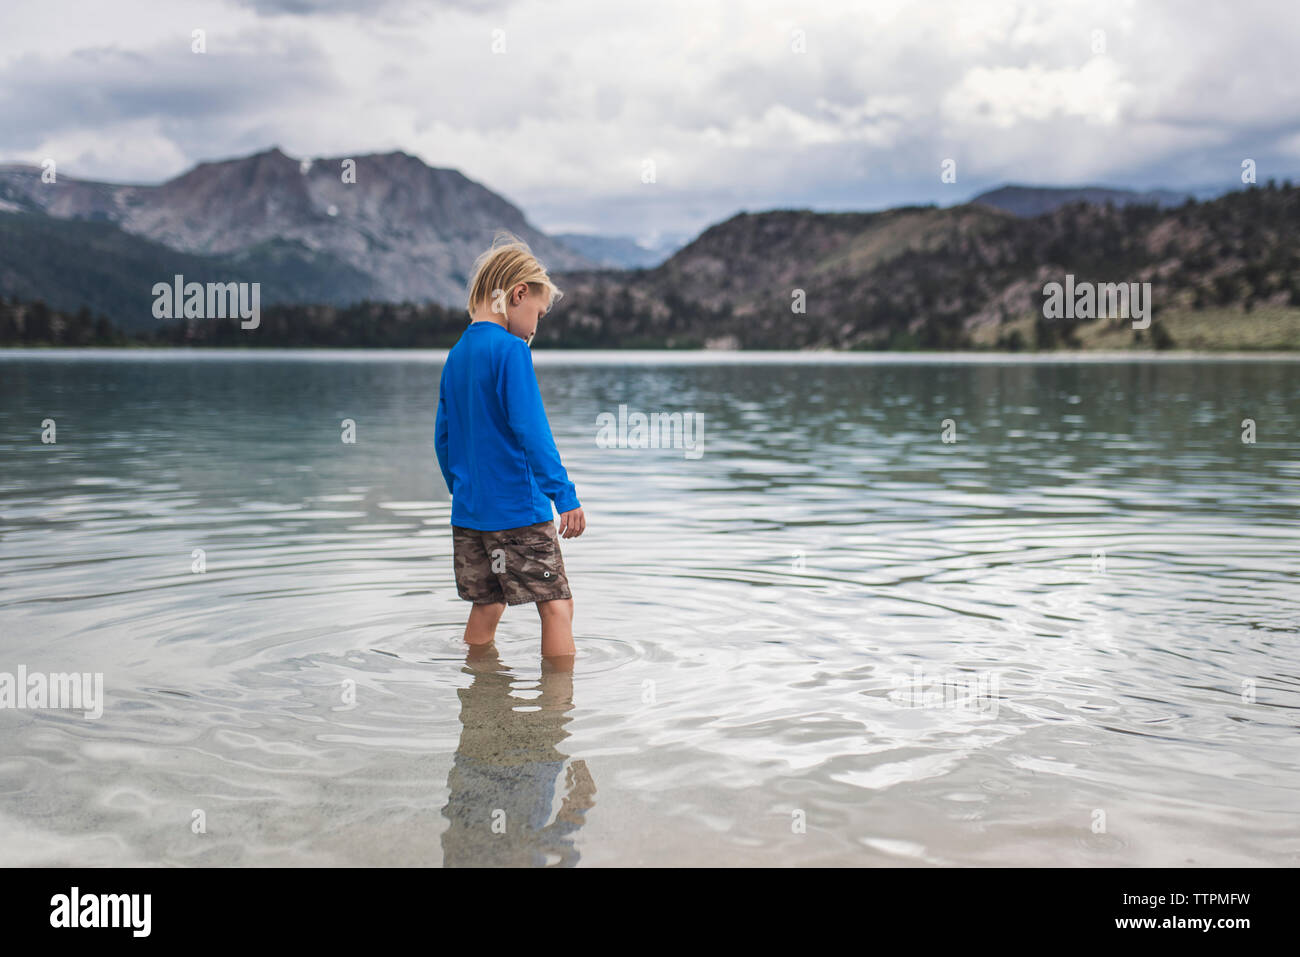 Carefree boy standing in lake montagnes contre Banque D'Images